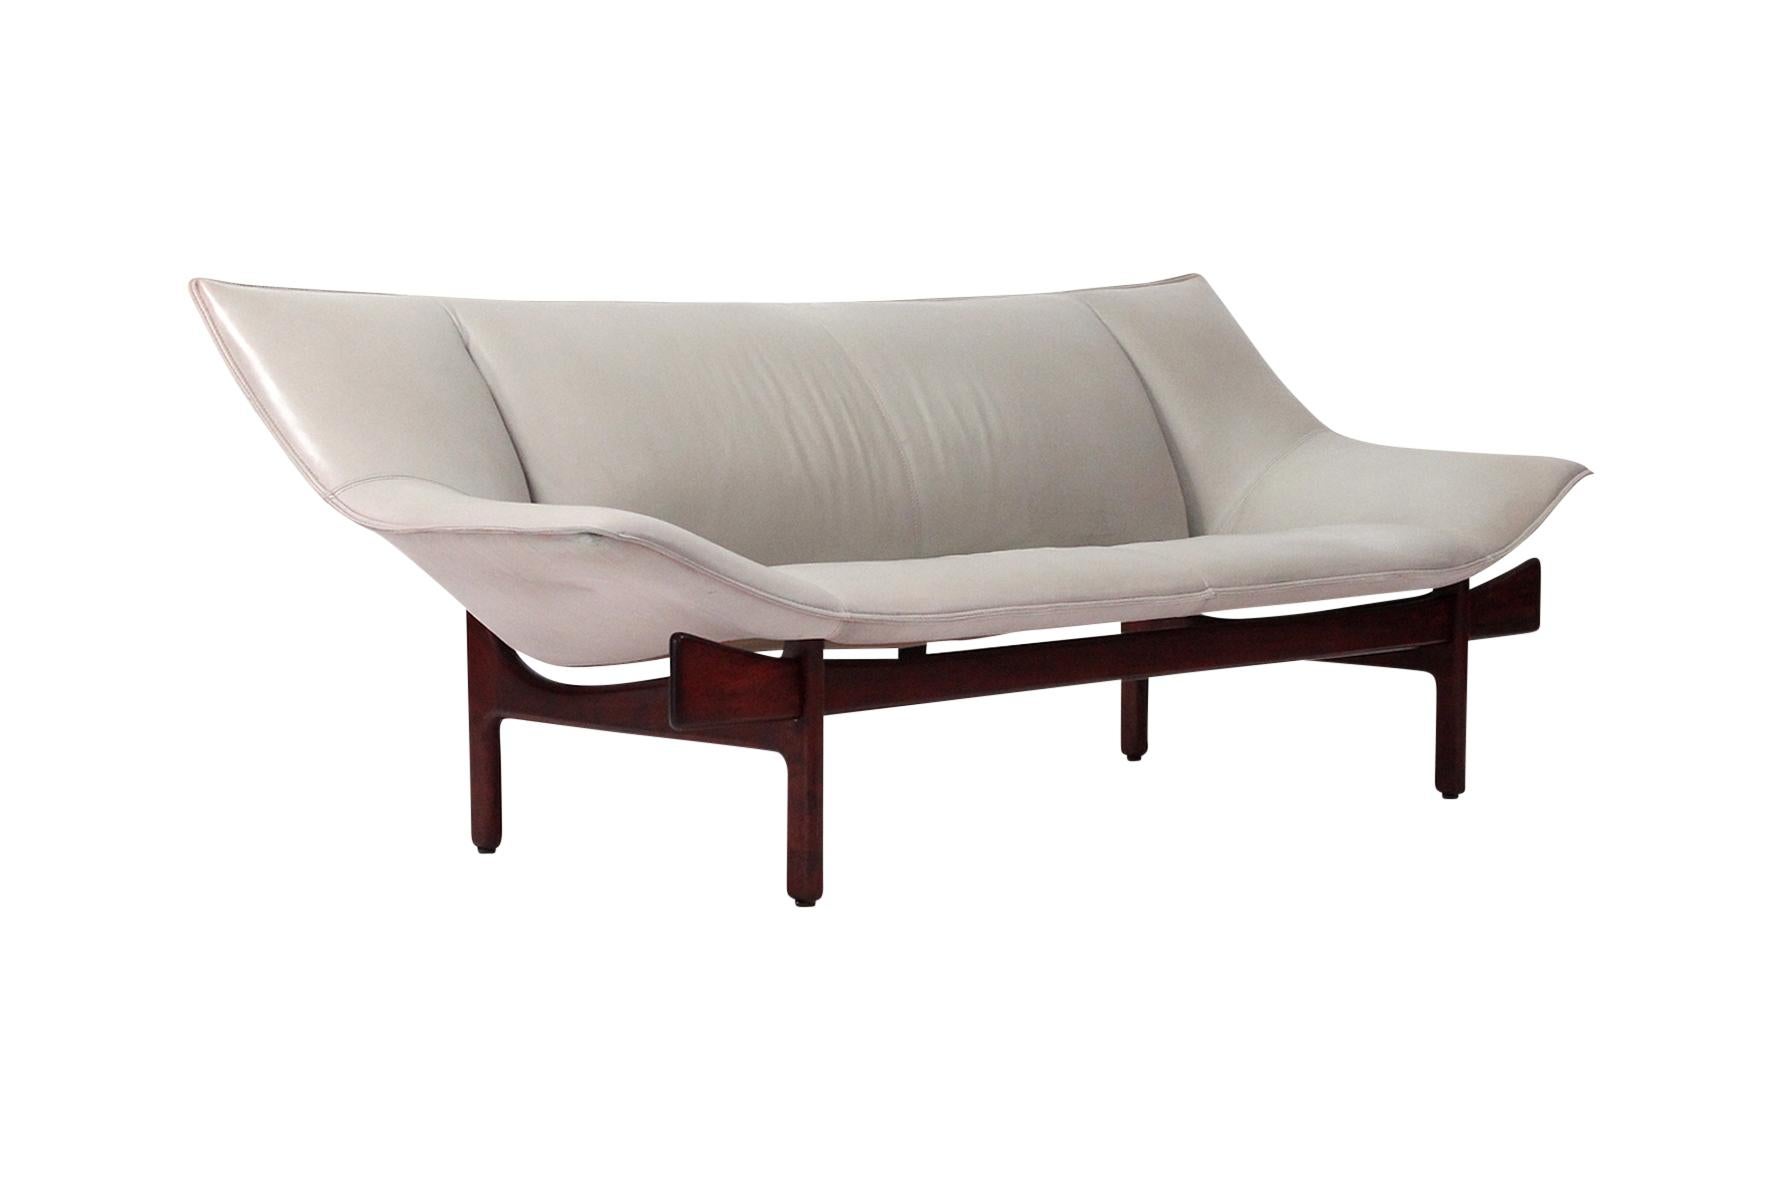 Beautiful leather 3-seat sofa by O&M Design. This design blends Japanese and Scandinavian design aesthetics bringing traditional shapes into a modern context. The base frame is modeled on the design of Torii temple entrance gates. Manufactured by